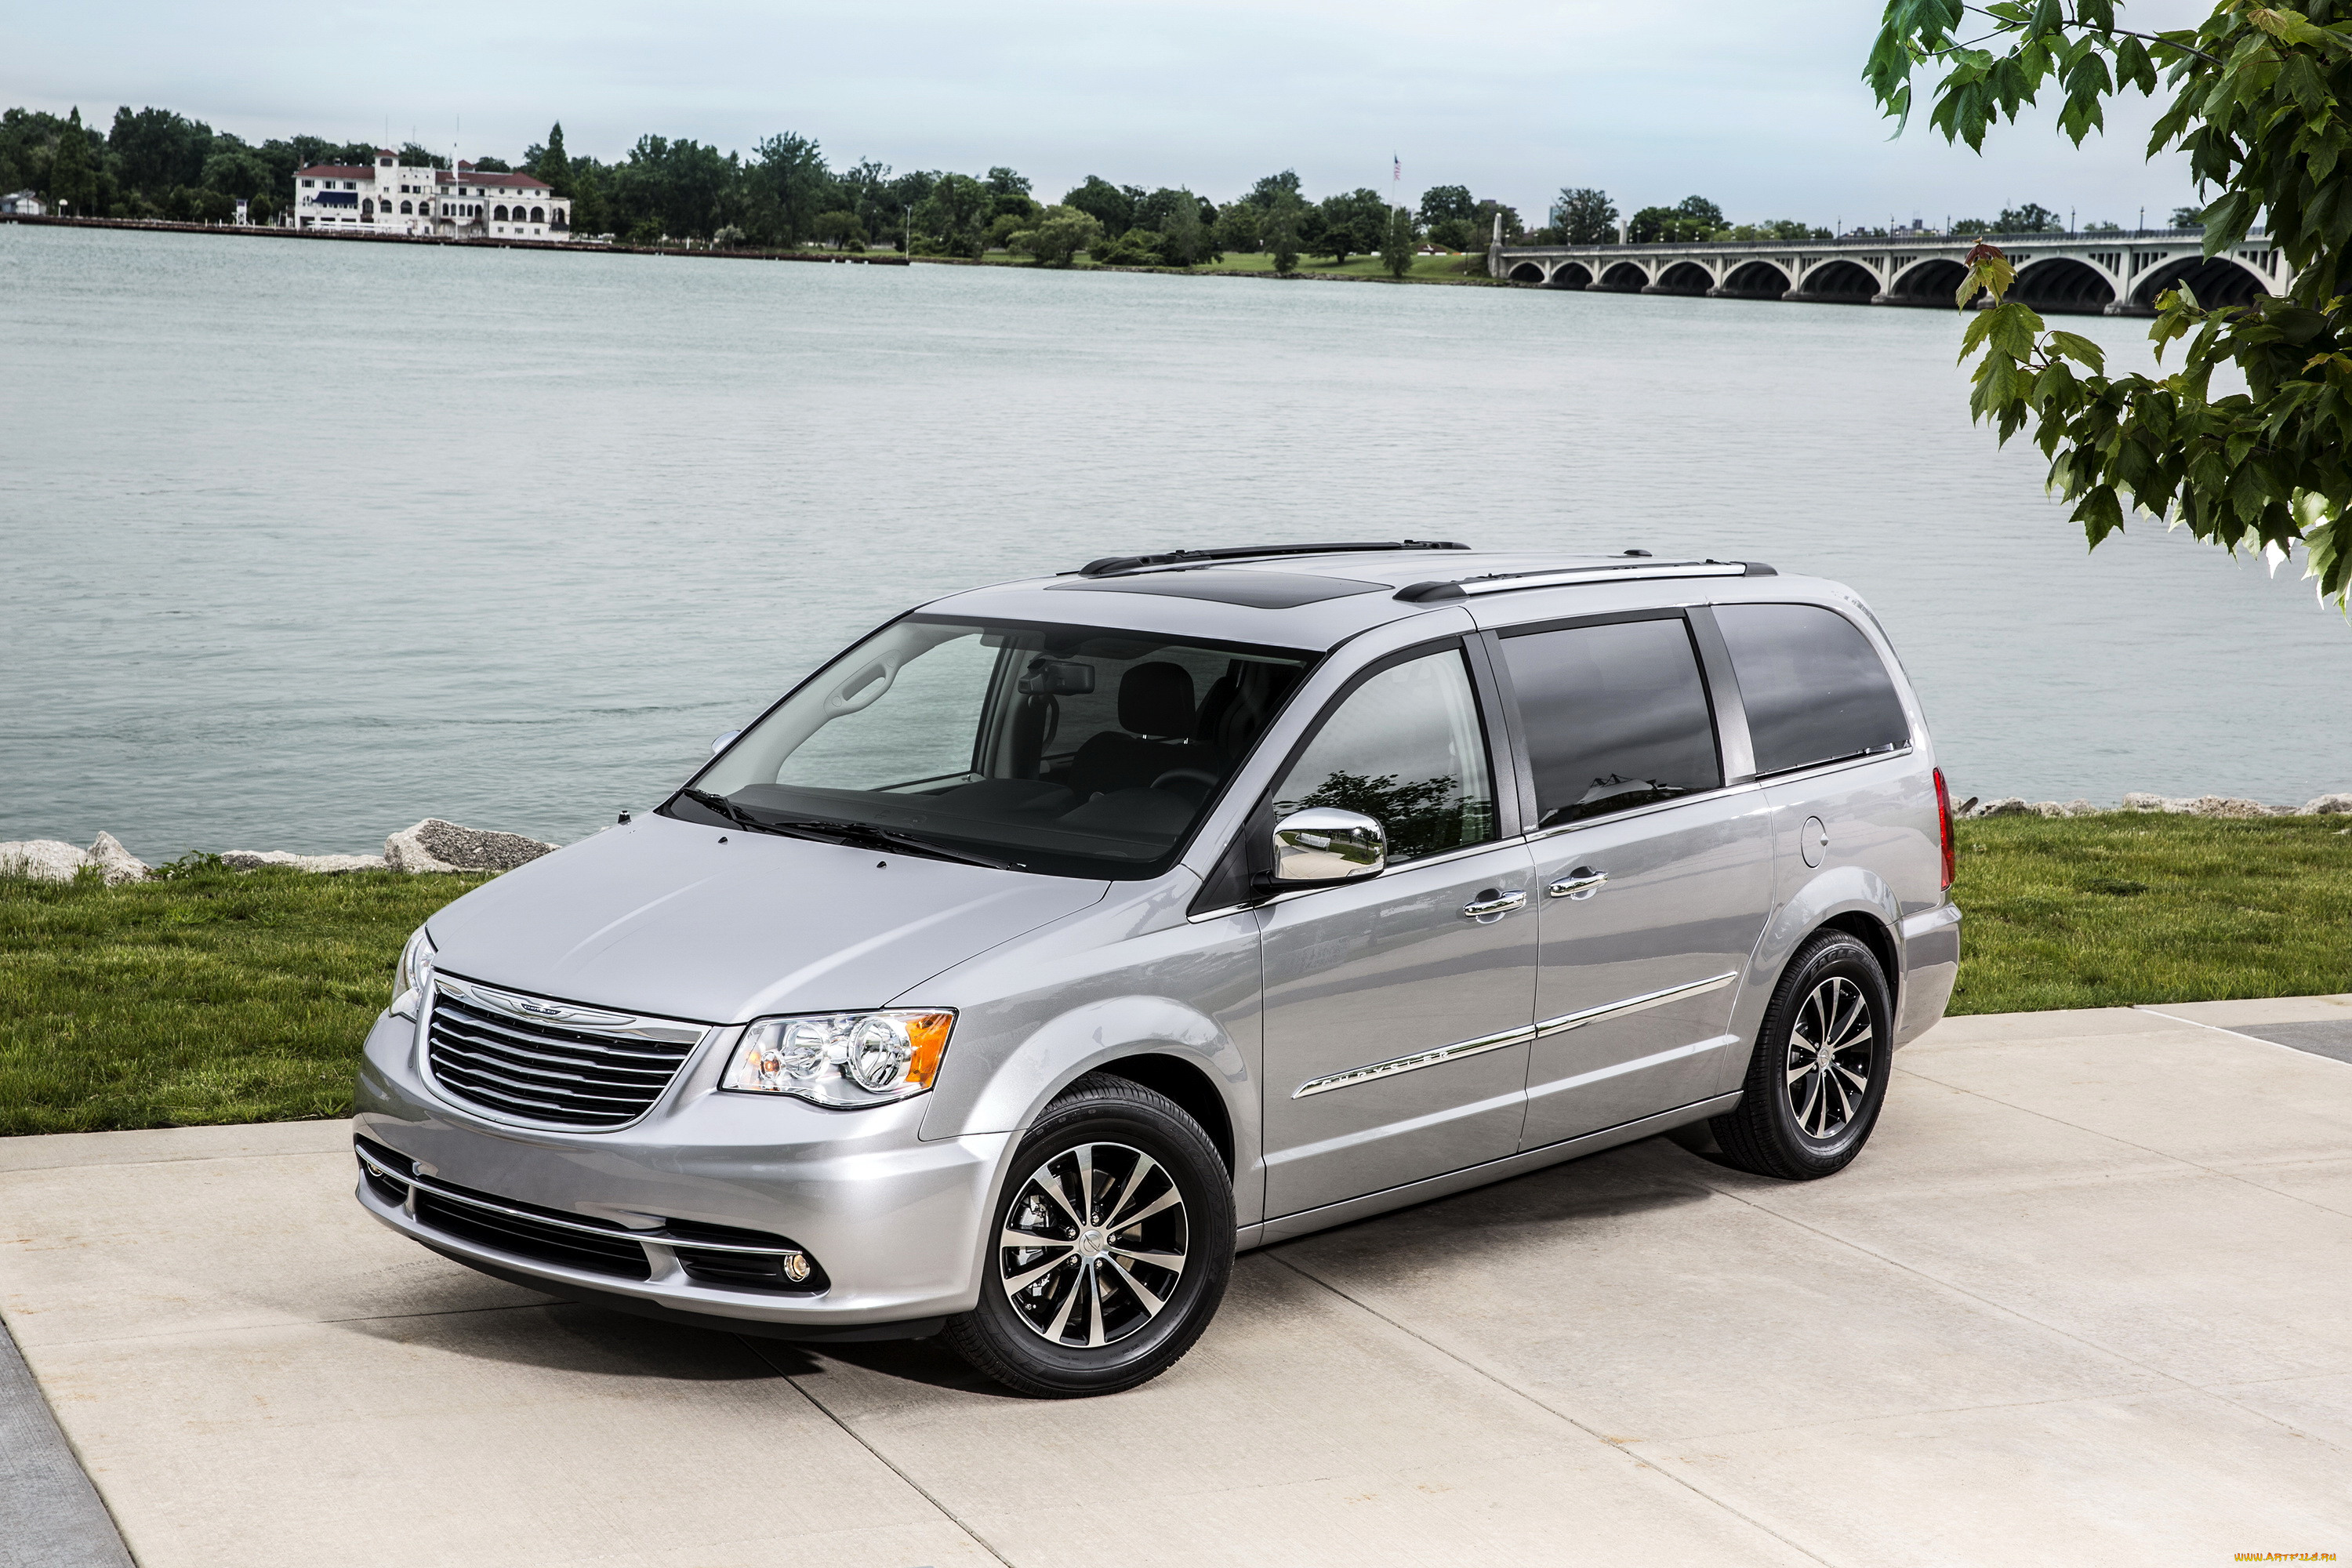 2015 chrysler town and country, , chrysler, 